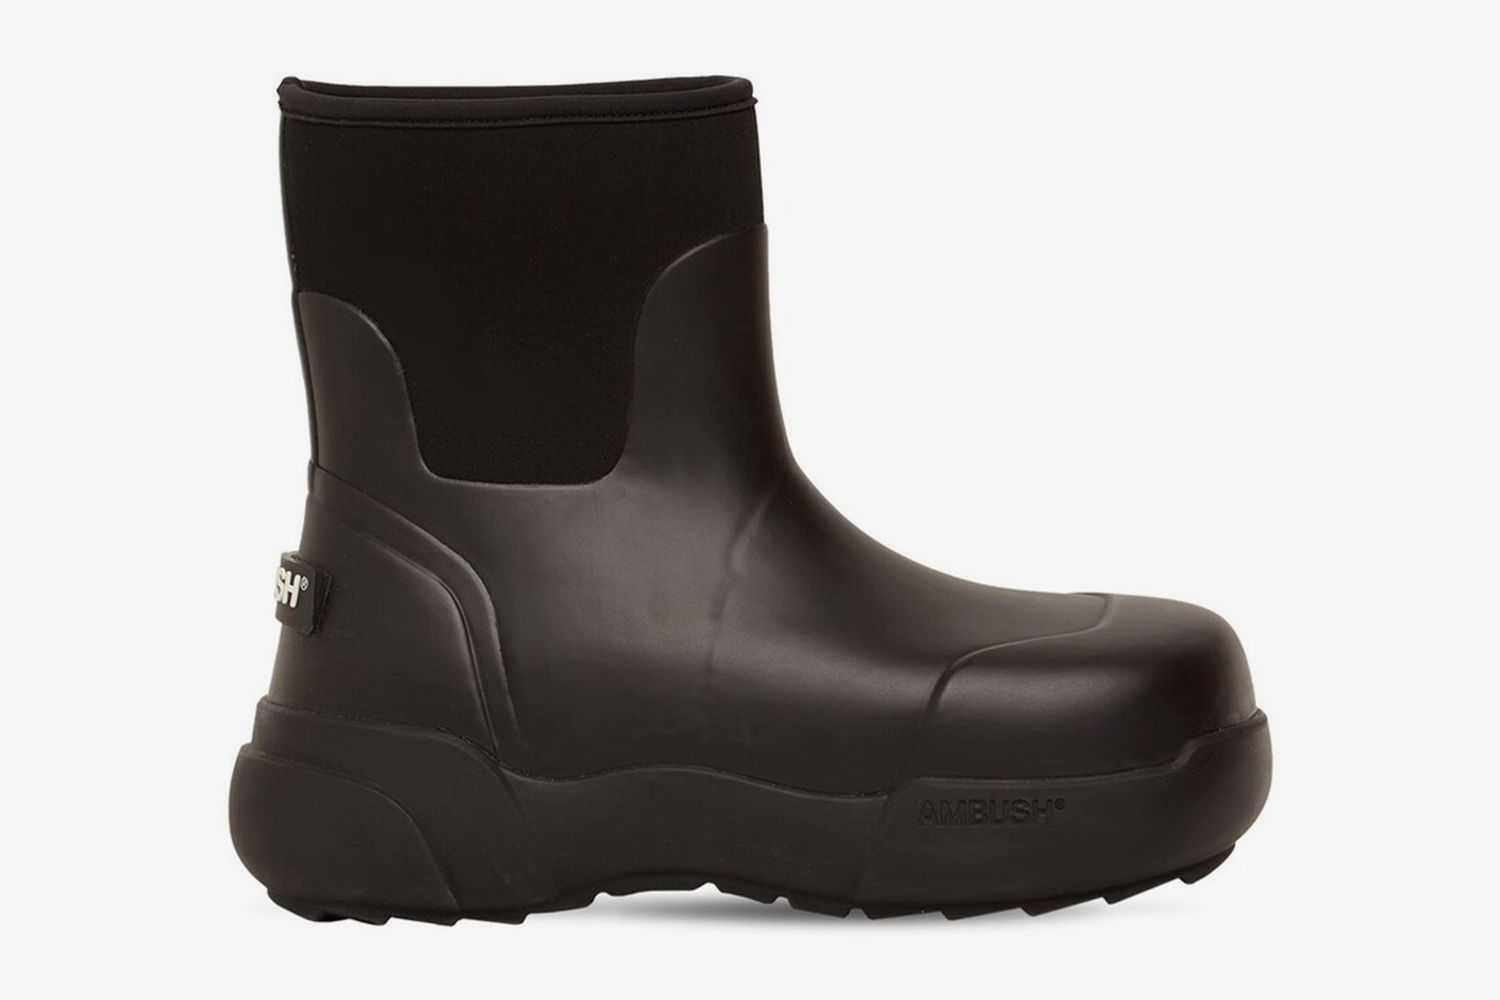 30mm Rubber Boots